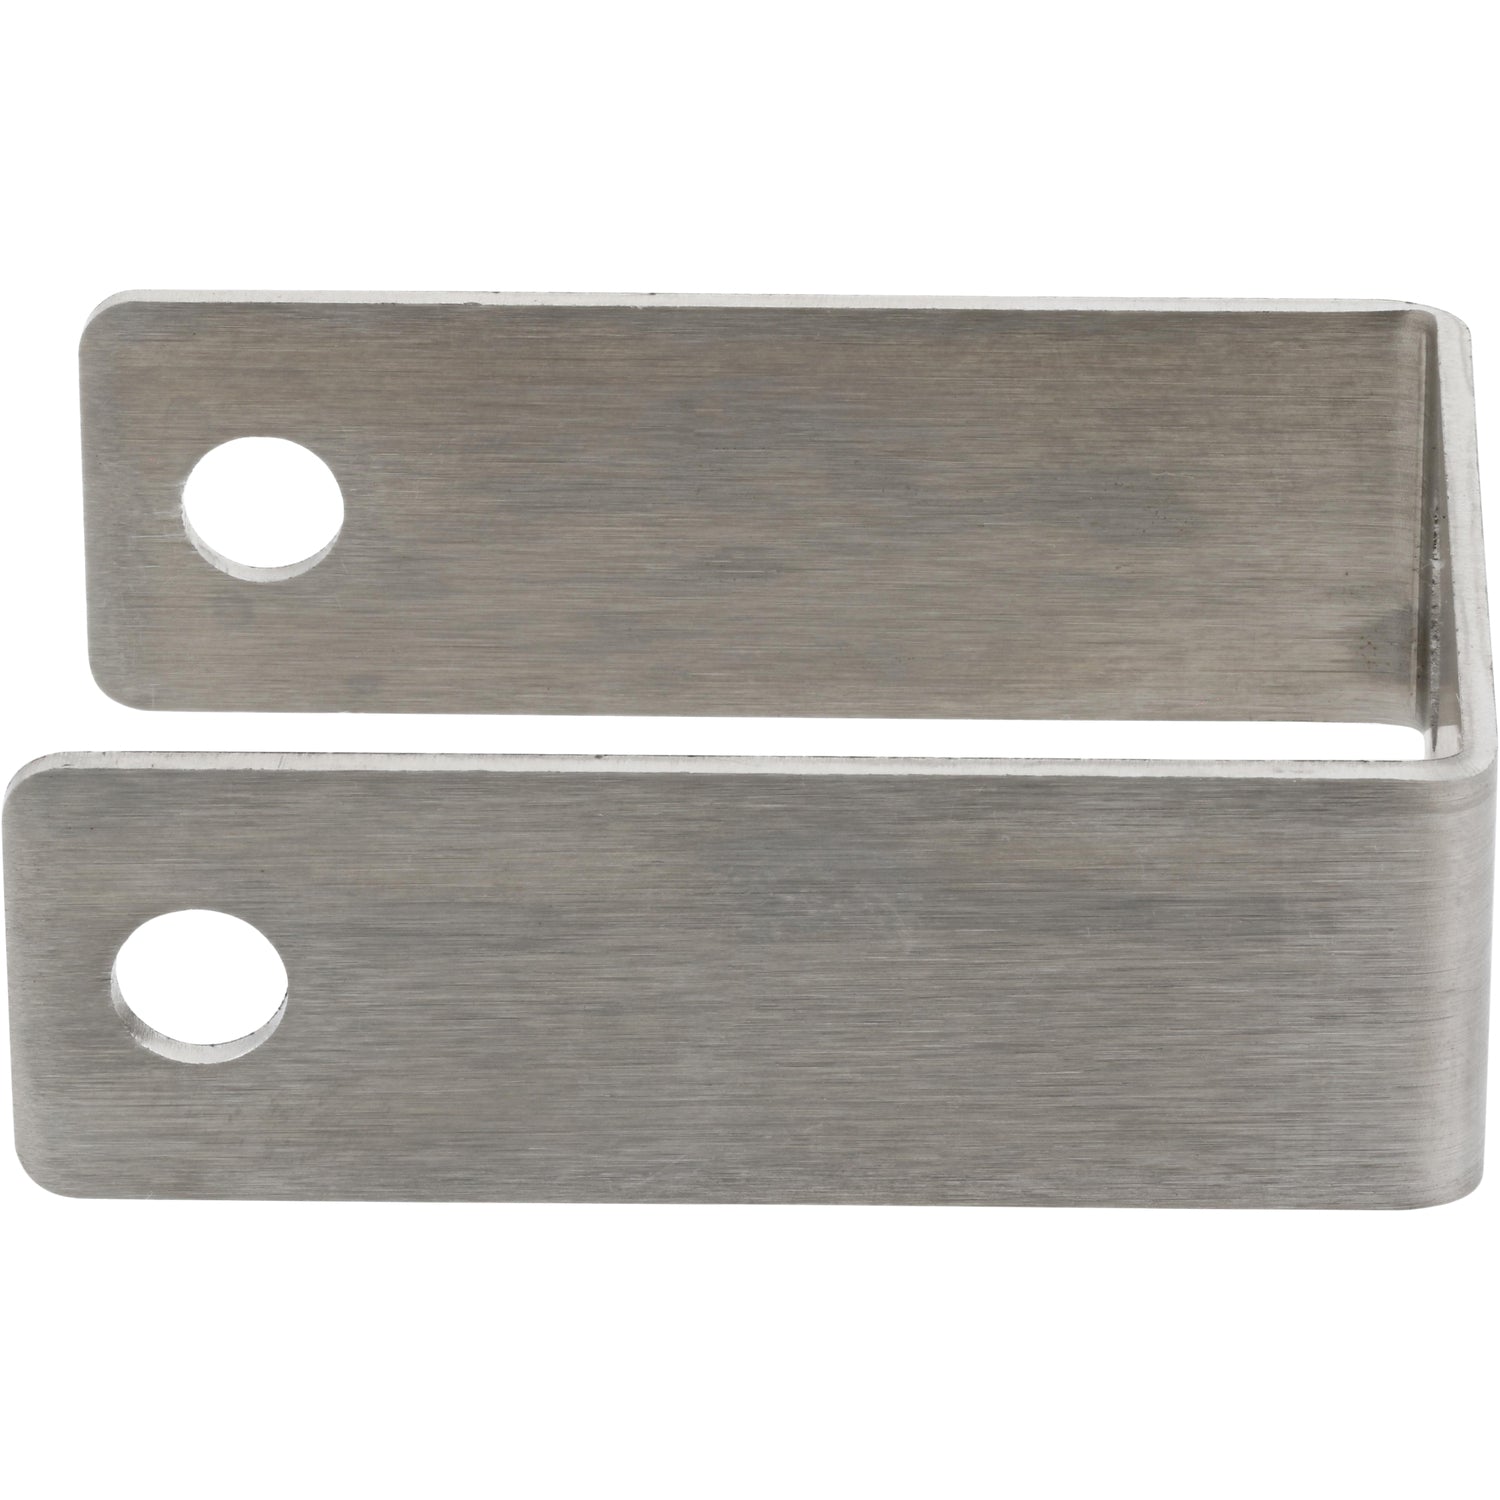 Bent stainless steel mounting bracket with holes on white background.